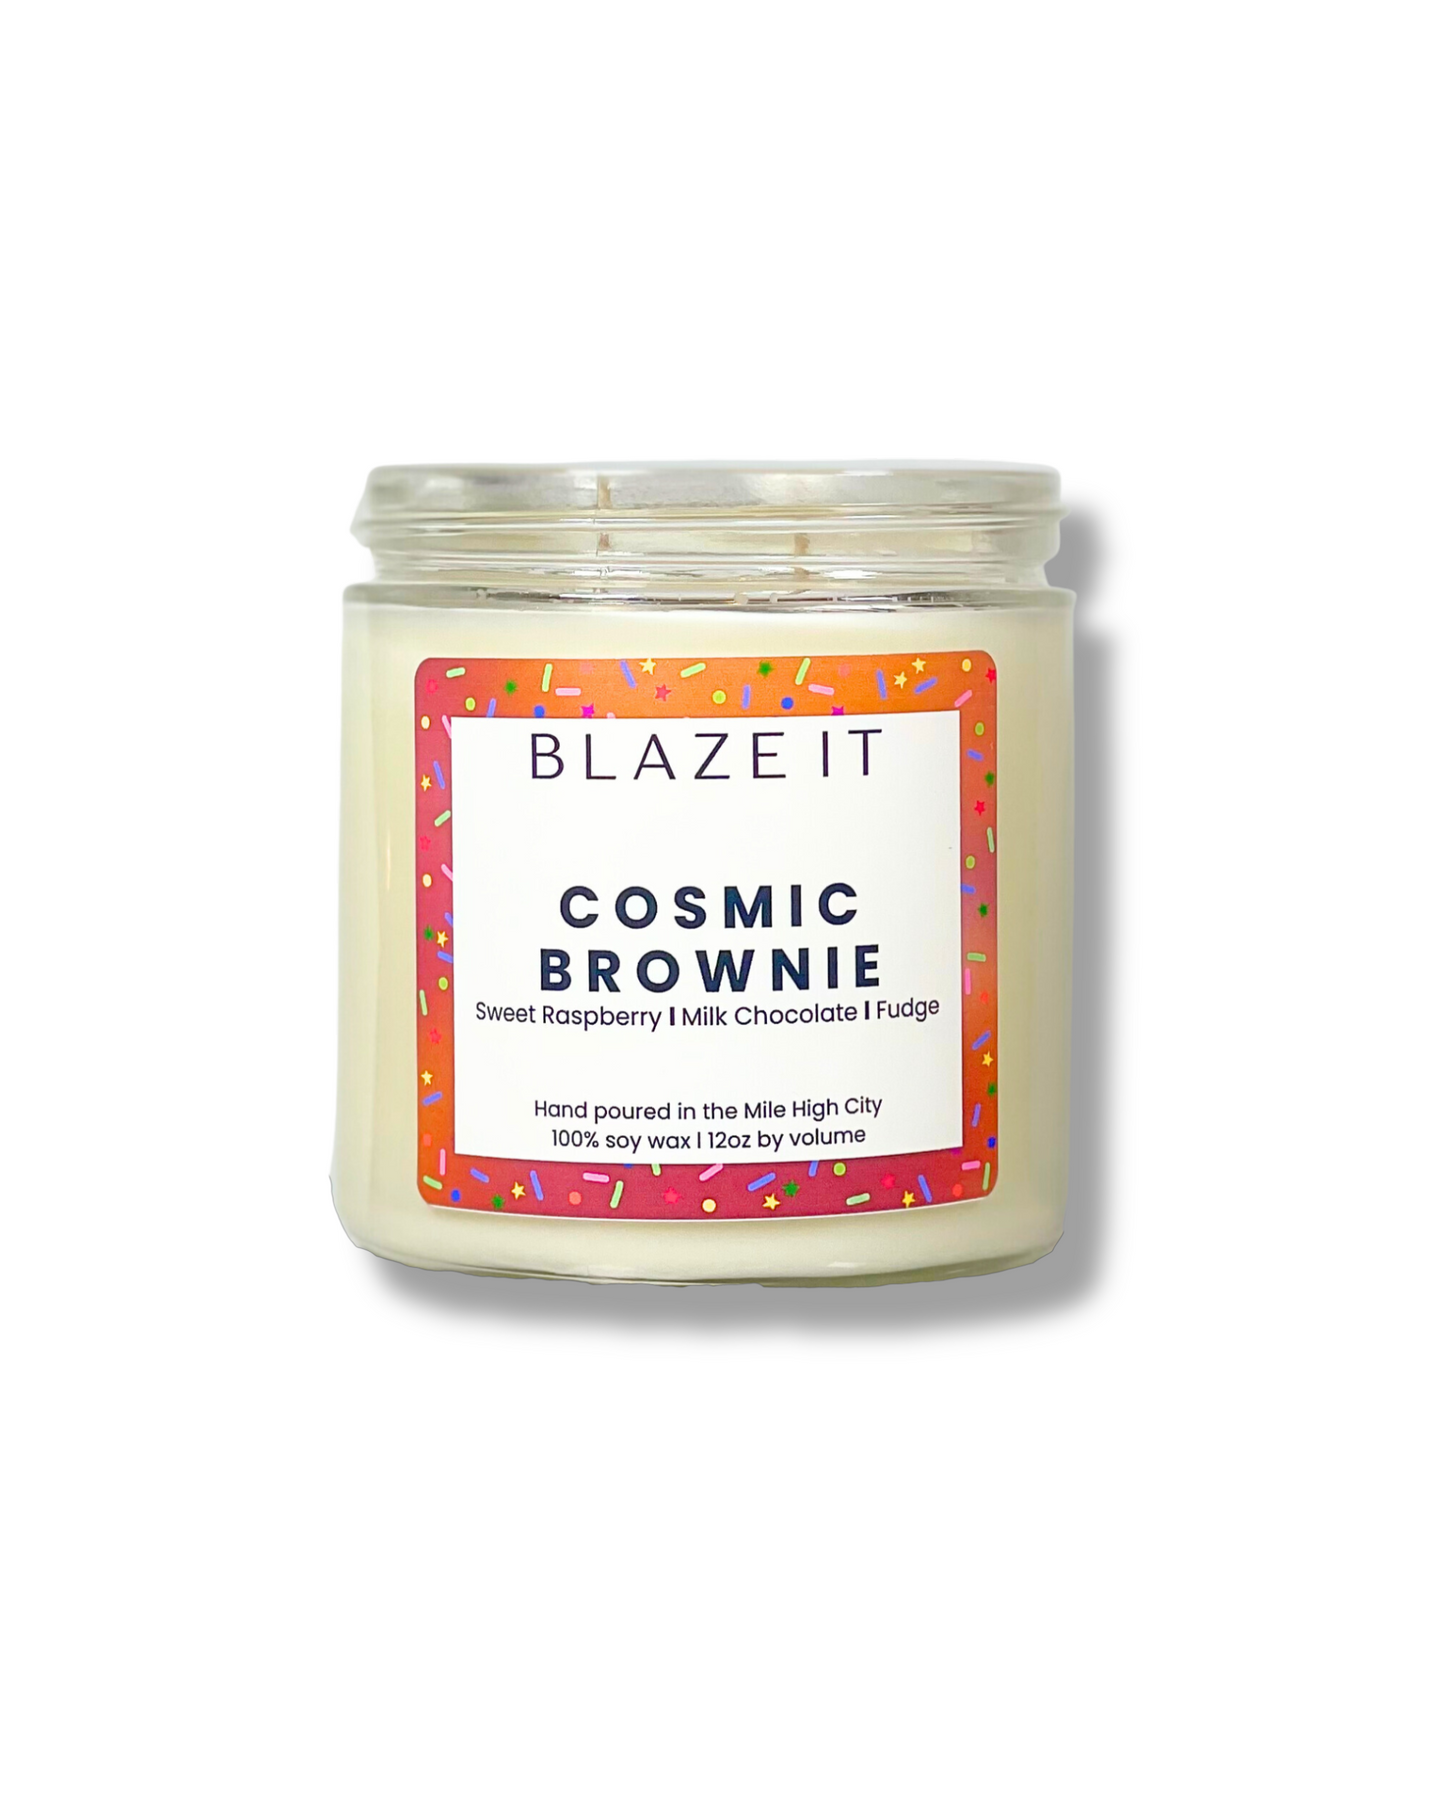 Cosmic Brownie candle - Blaze it Candle co